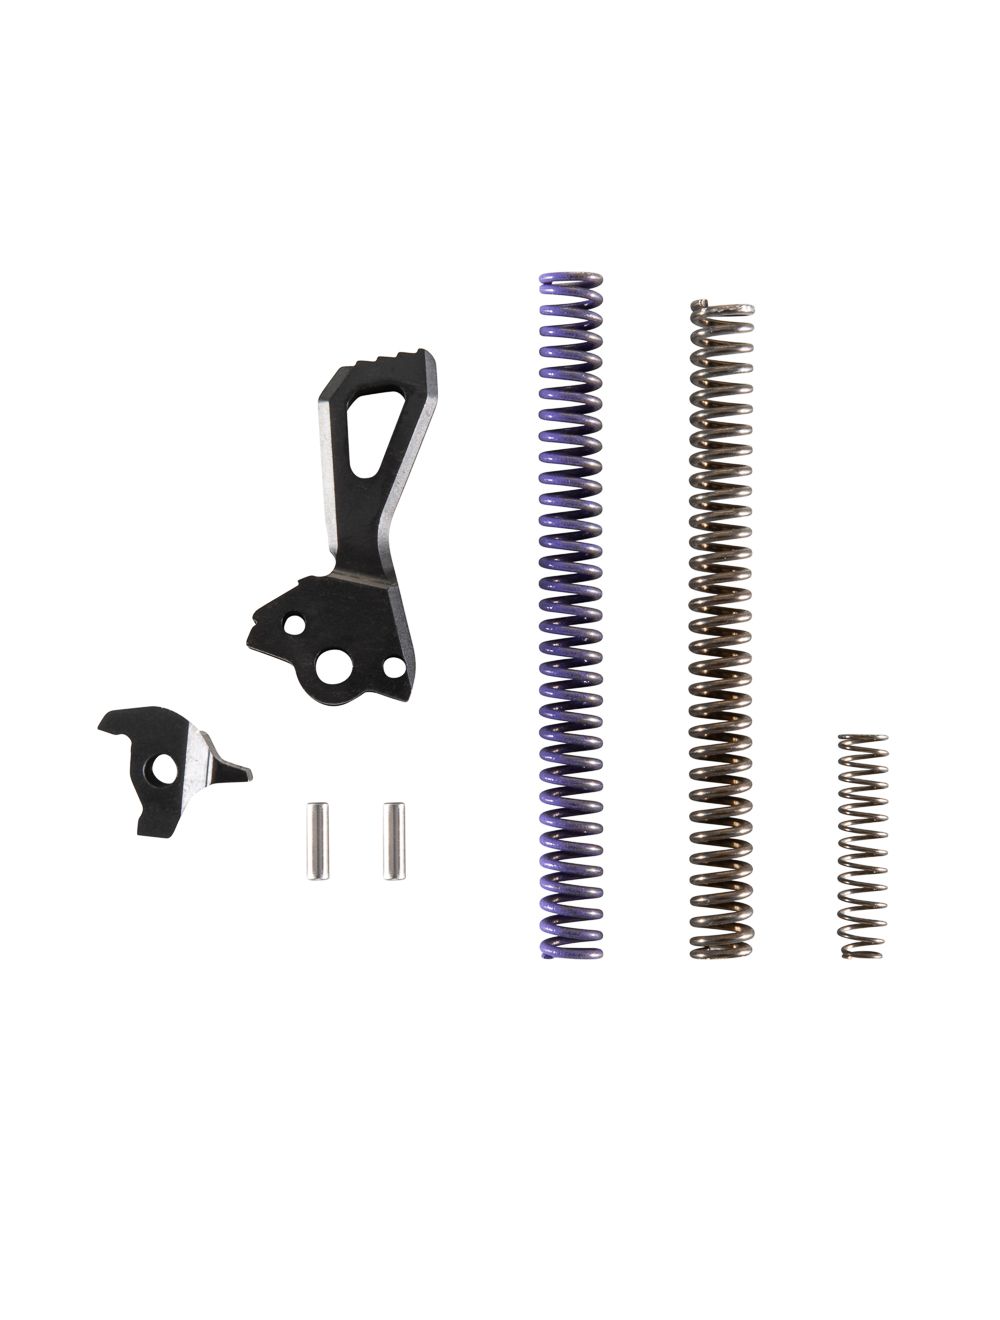 Action Enhancement Kit for CZ 75 B (thumb safety models only)